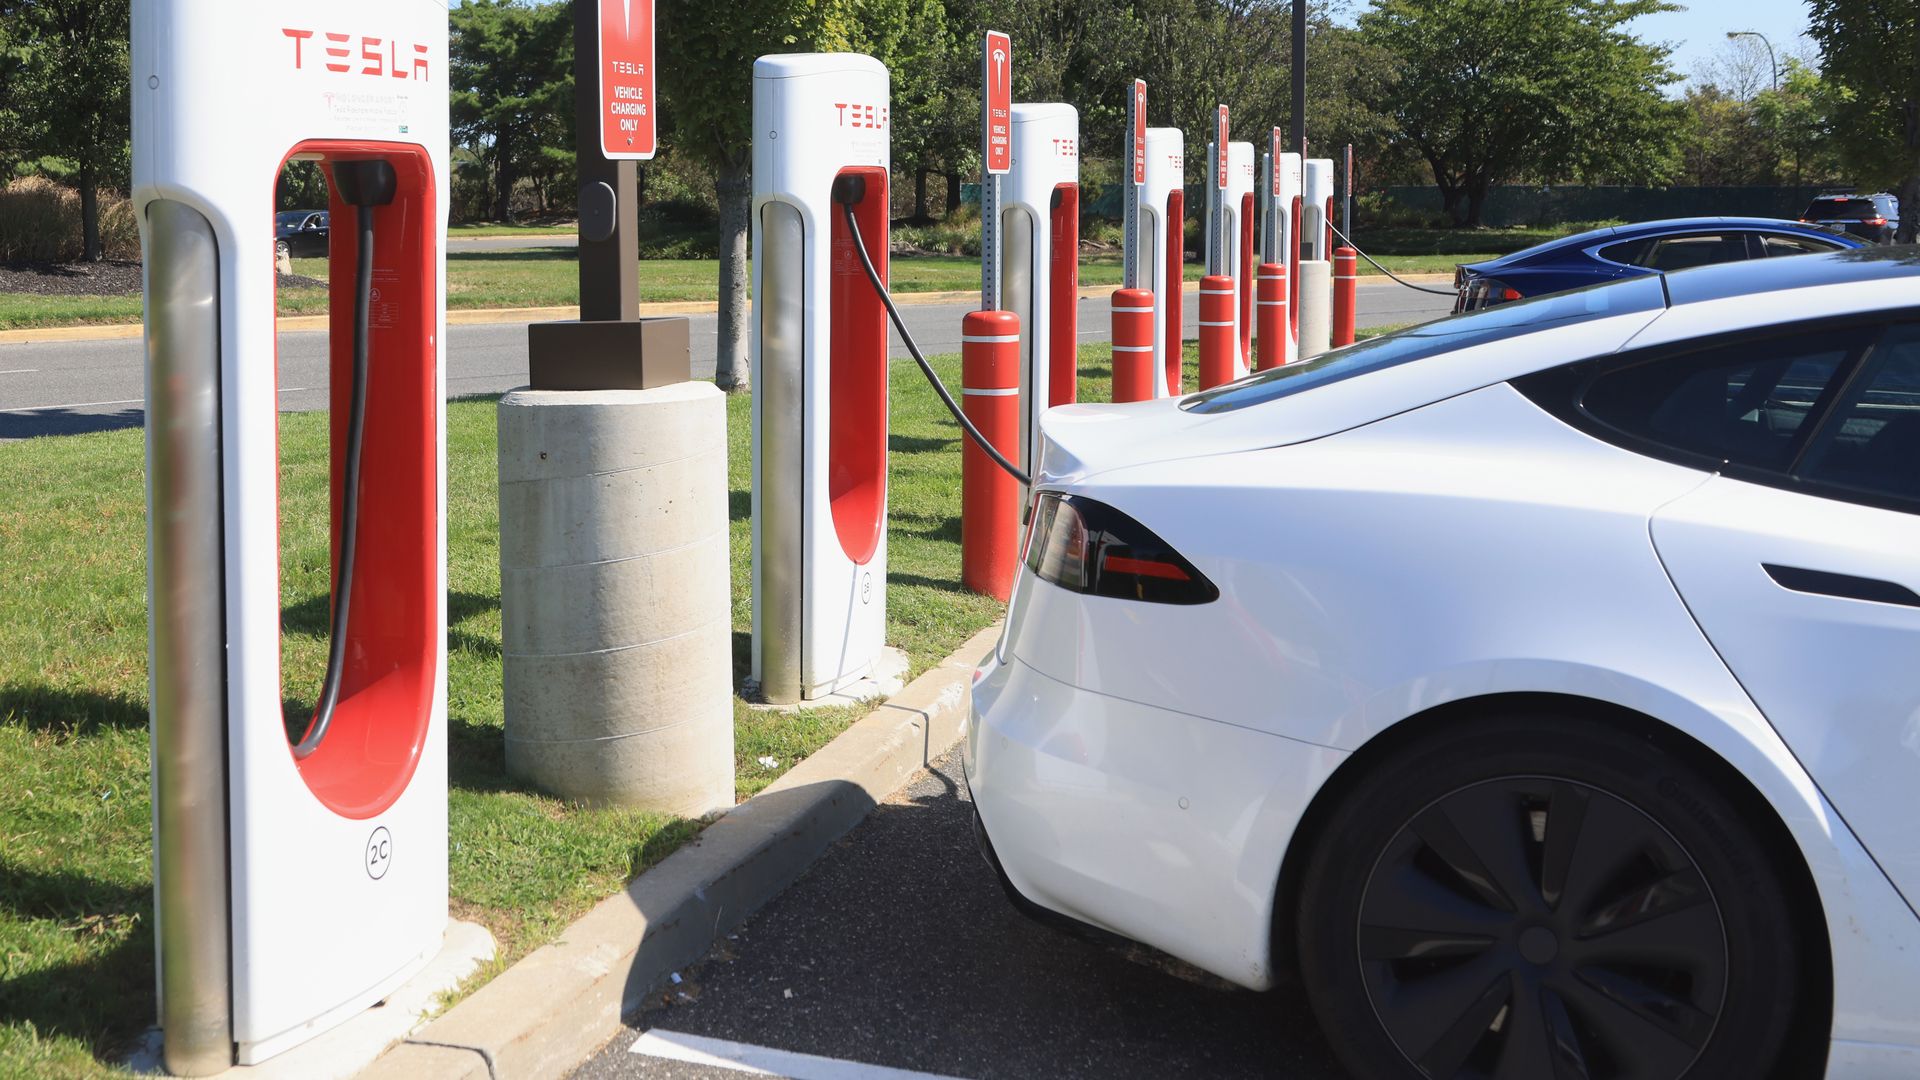 A general view of a Tesla car charging station on September 15, 2022 in Garden City.